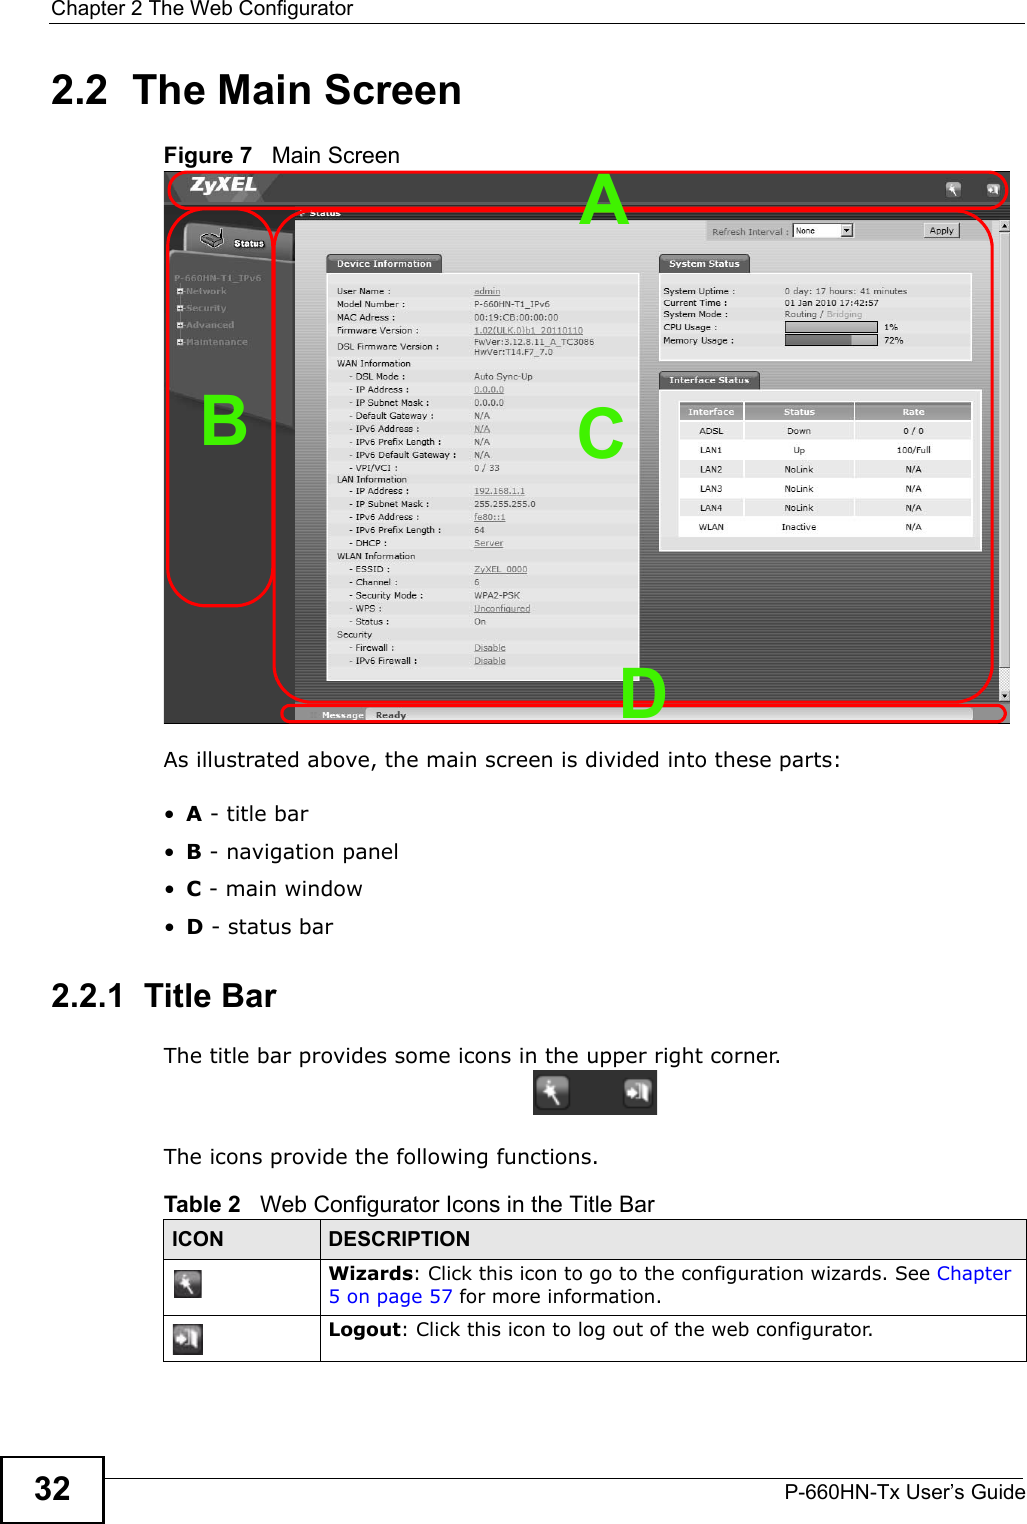 Chapter 2 The Web ConfiguratorP-660HN-Tx User’s Guide322.2  The Main ScreenFigure 7   Main ScreenAs illustrated above, the main screen is divided into these parts:•A - title bar•B - navigation panel•C - main window•D - status bar2.2.1  Title BarThe title bar provides some icons in the upper right corner.The icons provide the following functions.BCDATable 2   Web Configurator Icons in the Title BarICON  DESCRIPTIONWizards: Click this icon to go to the configuration wizards. See Chapter 5 on page 57 for more information.Logout: Click this icon to log out of the web configurator.